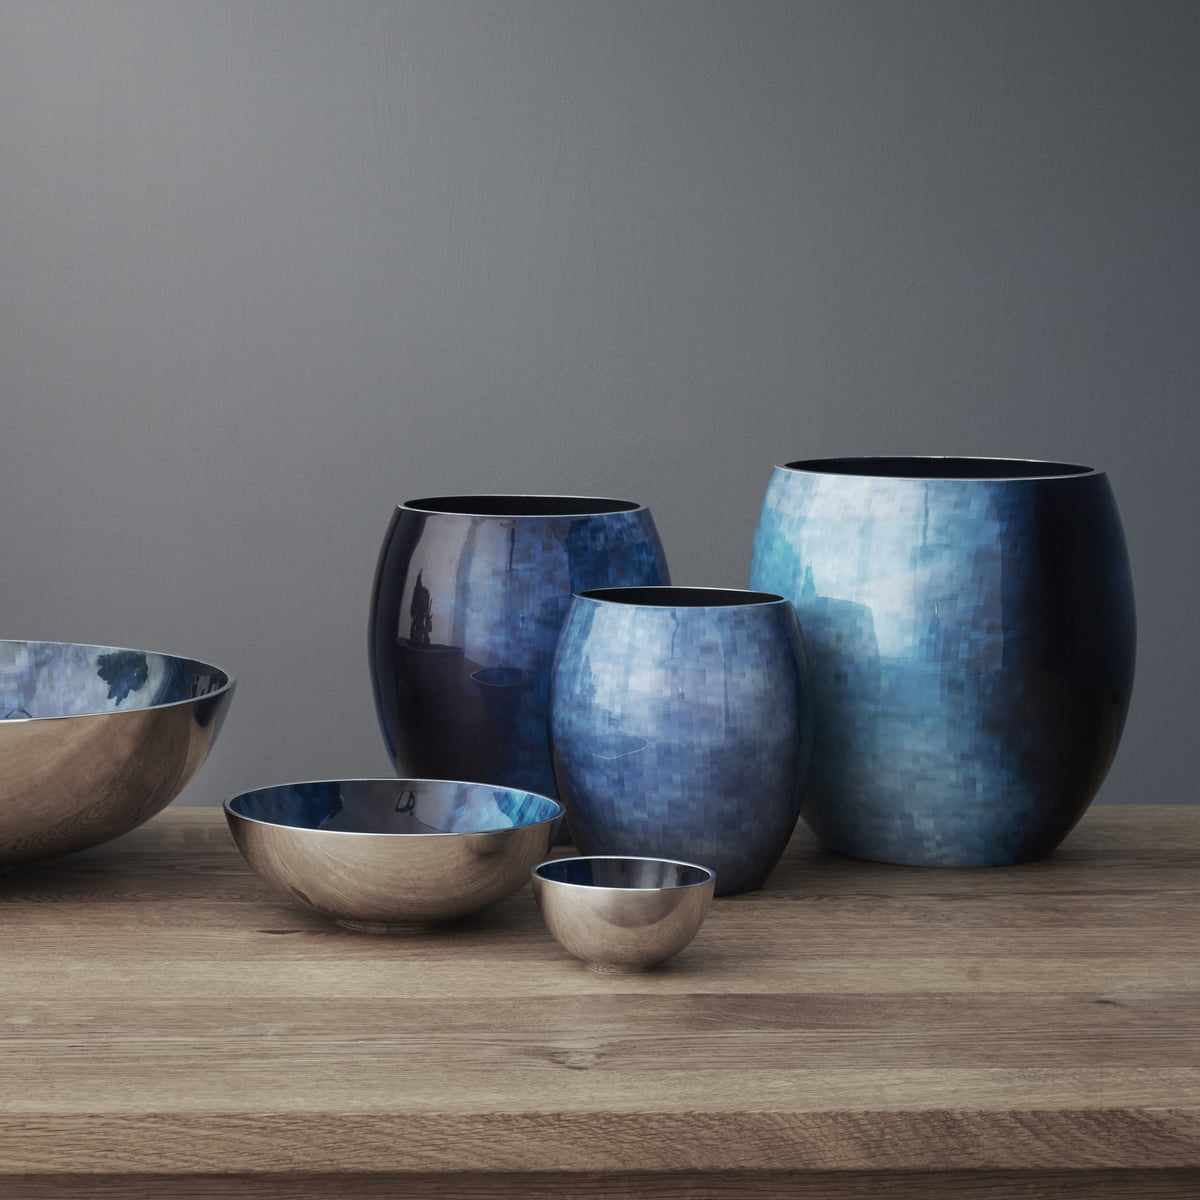 Stockholm our Horizon shop by in Stelton Bowl